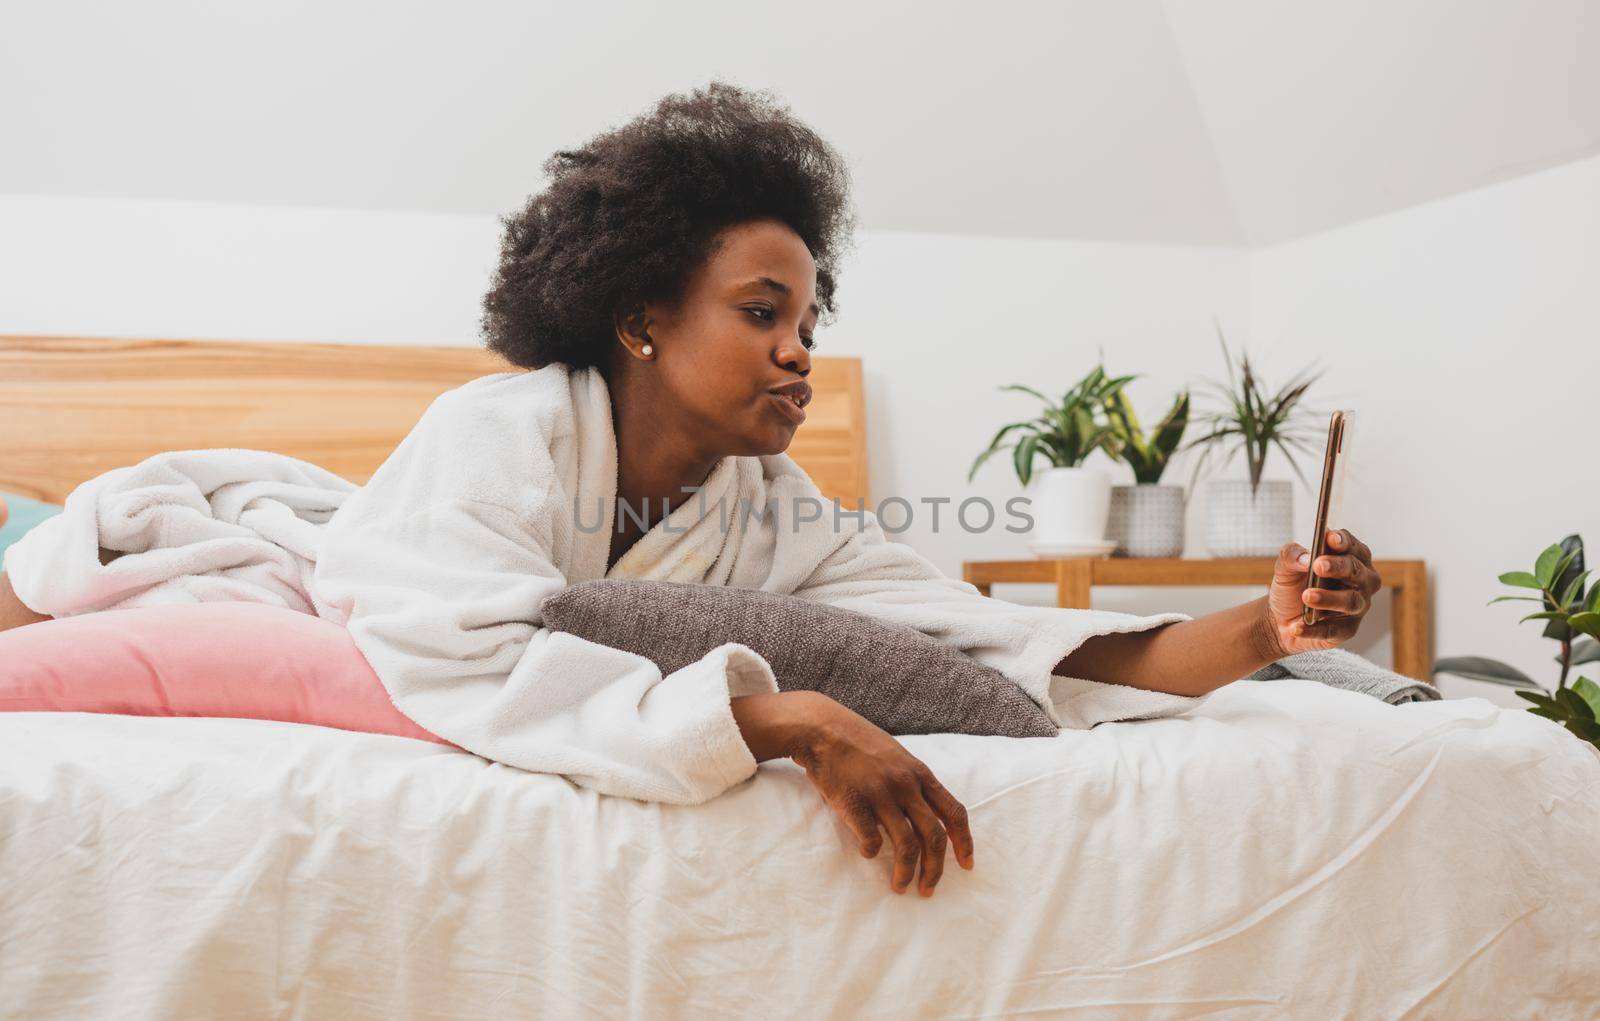 The beautiful woman is lying on the bed in a bathrobe and surfing the internet. The woman with smartphone is resting in a hotel